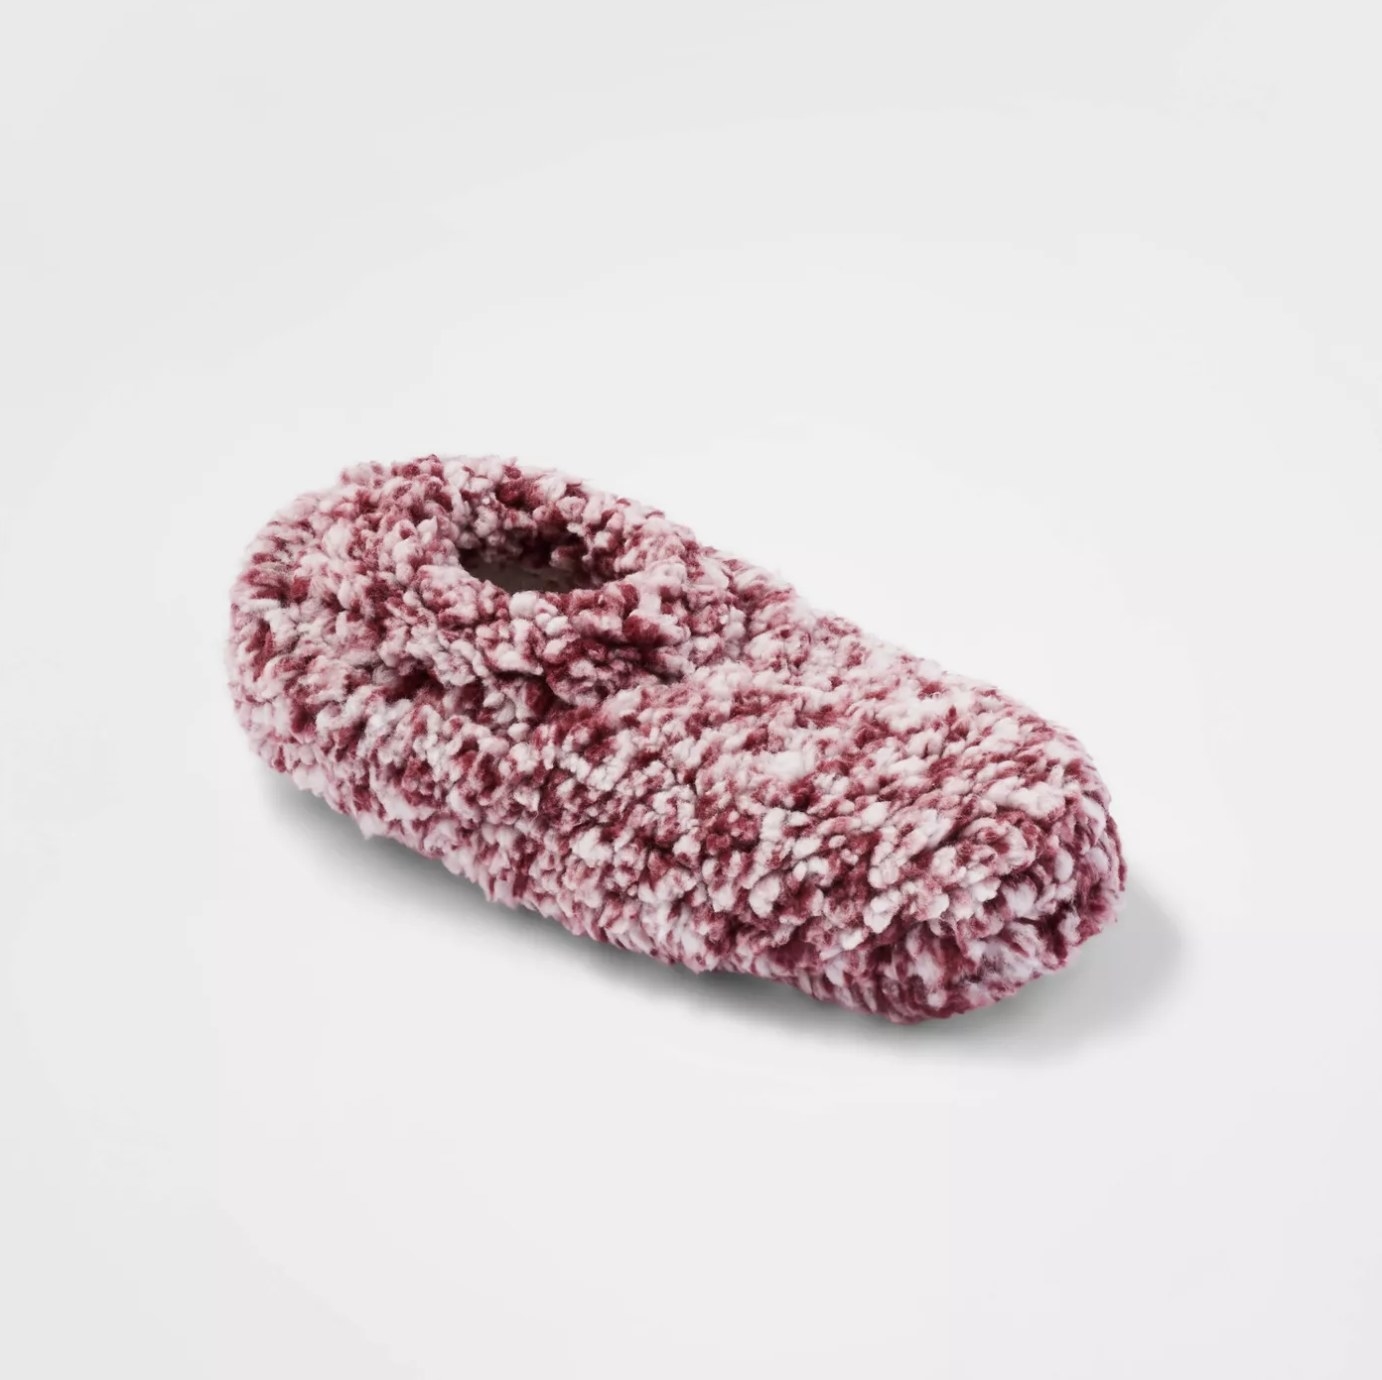 The maroon and white slipper